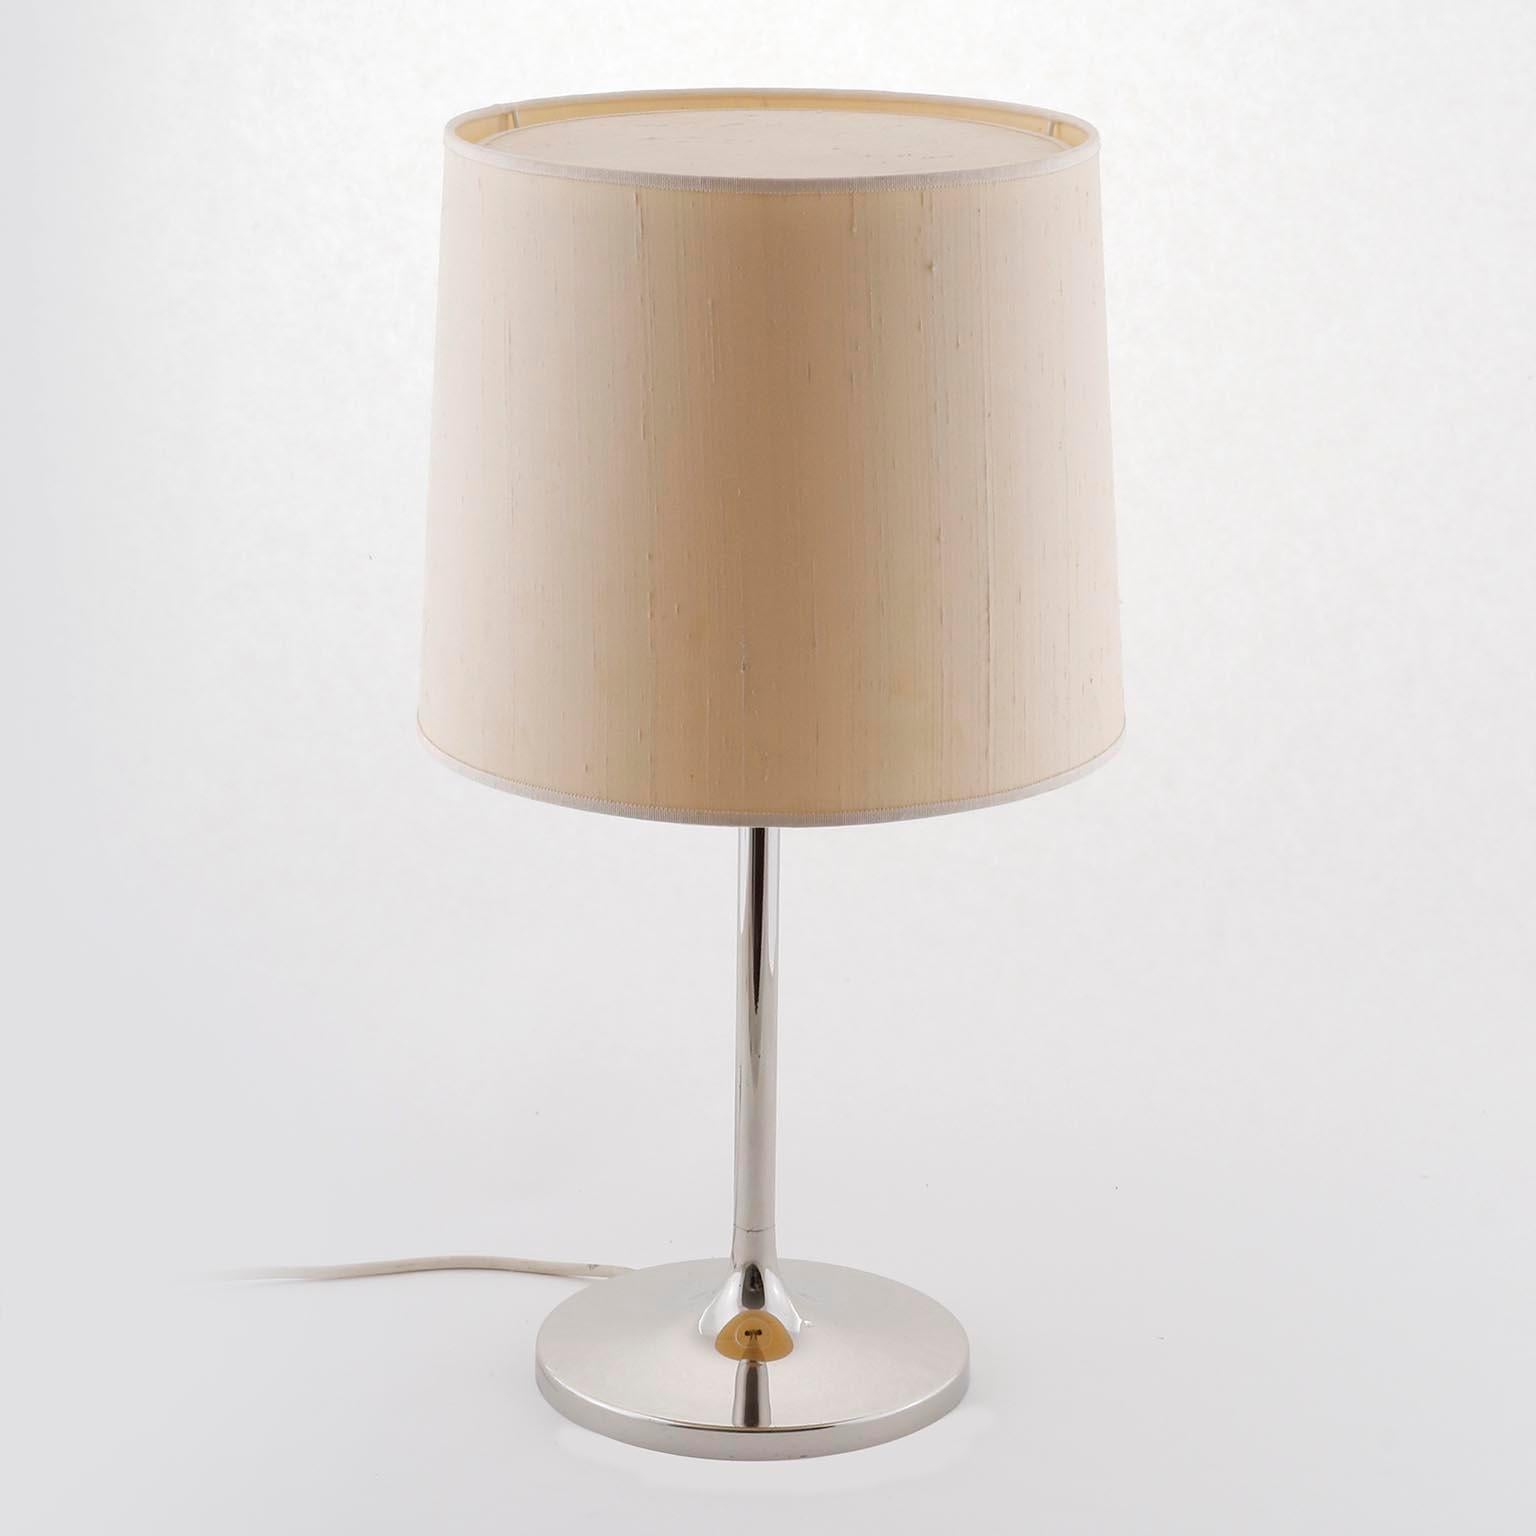 Mid-Century Modern Pair of Kalmar Table Lamps with Tulip Base, Polished Nickel, Beige Shade, 1970 For Sale